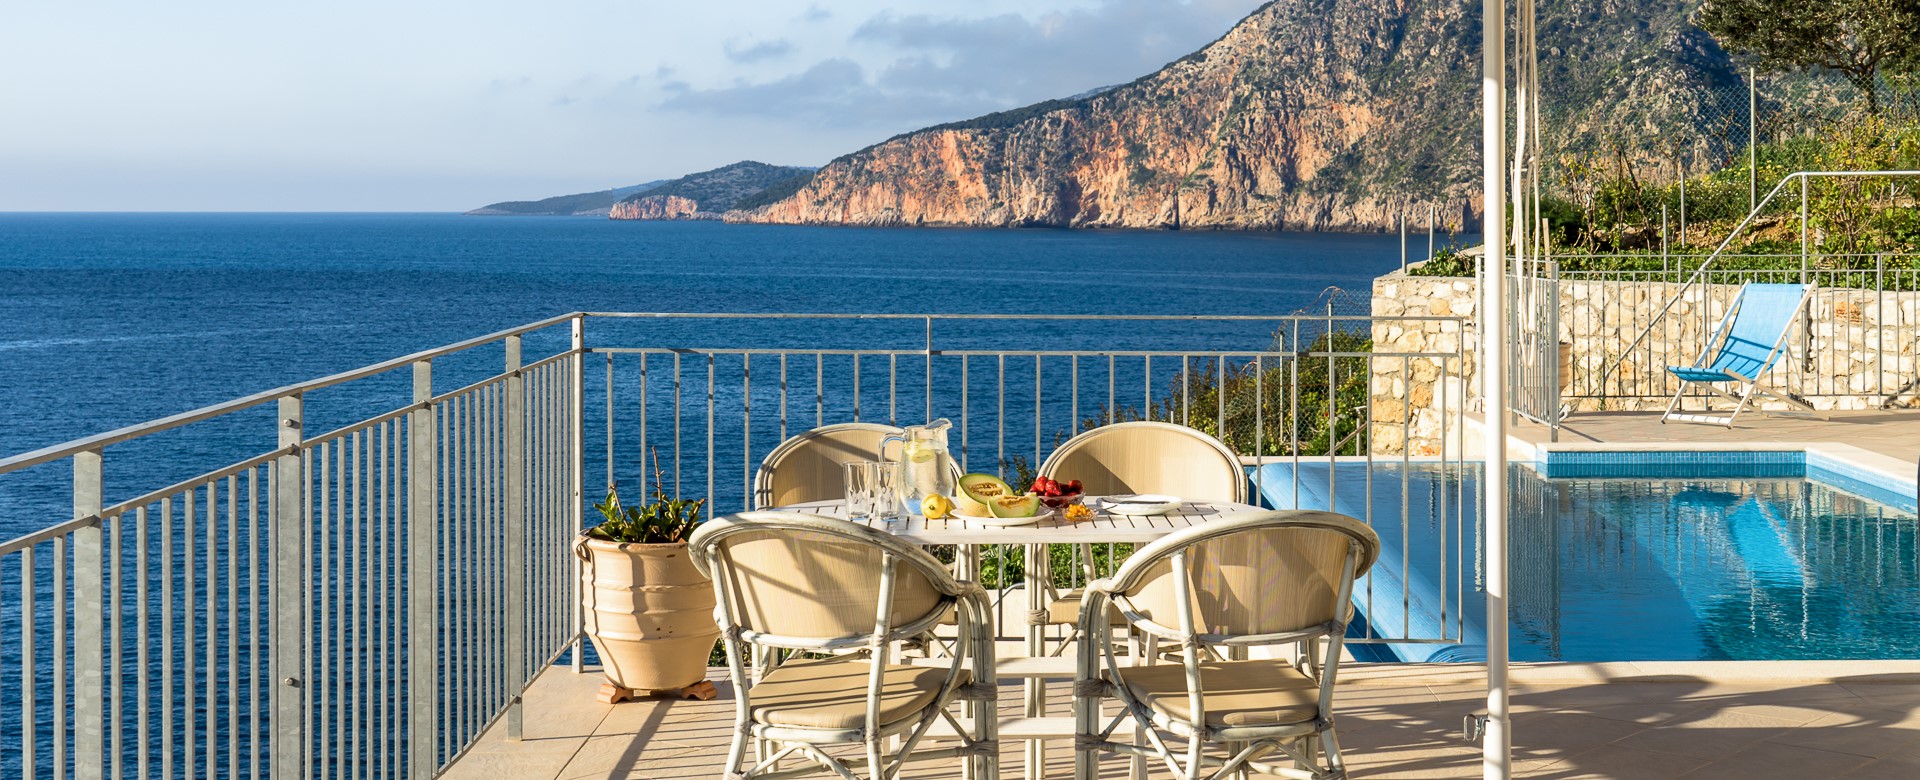 Lunchtime dining with a spectacular view at Villa Plori, Assos, Kefalonia